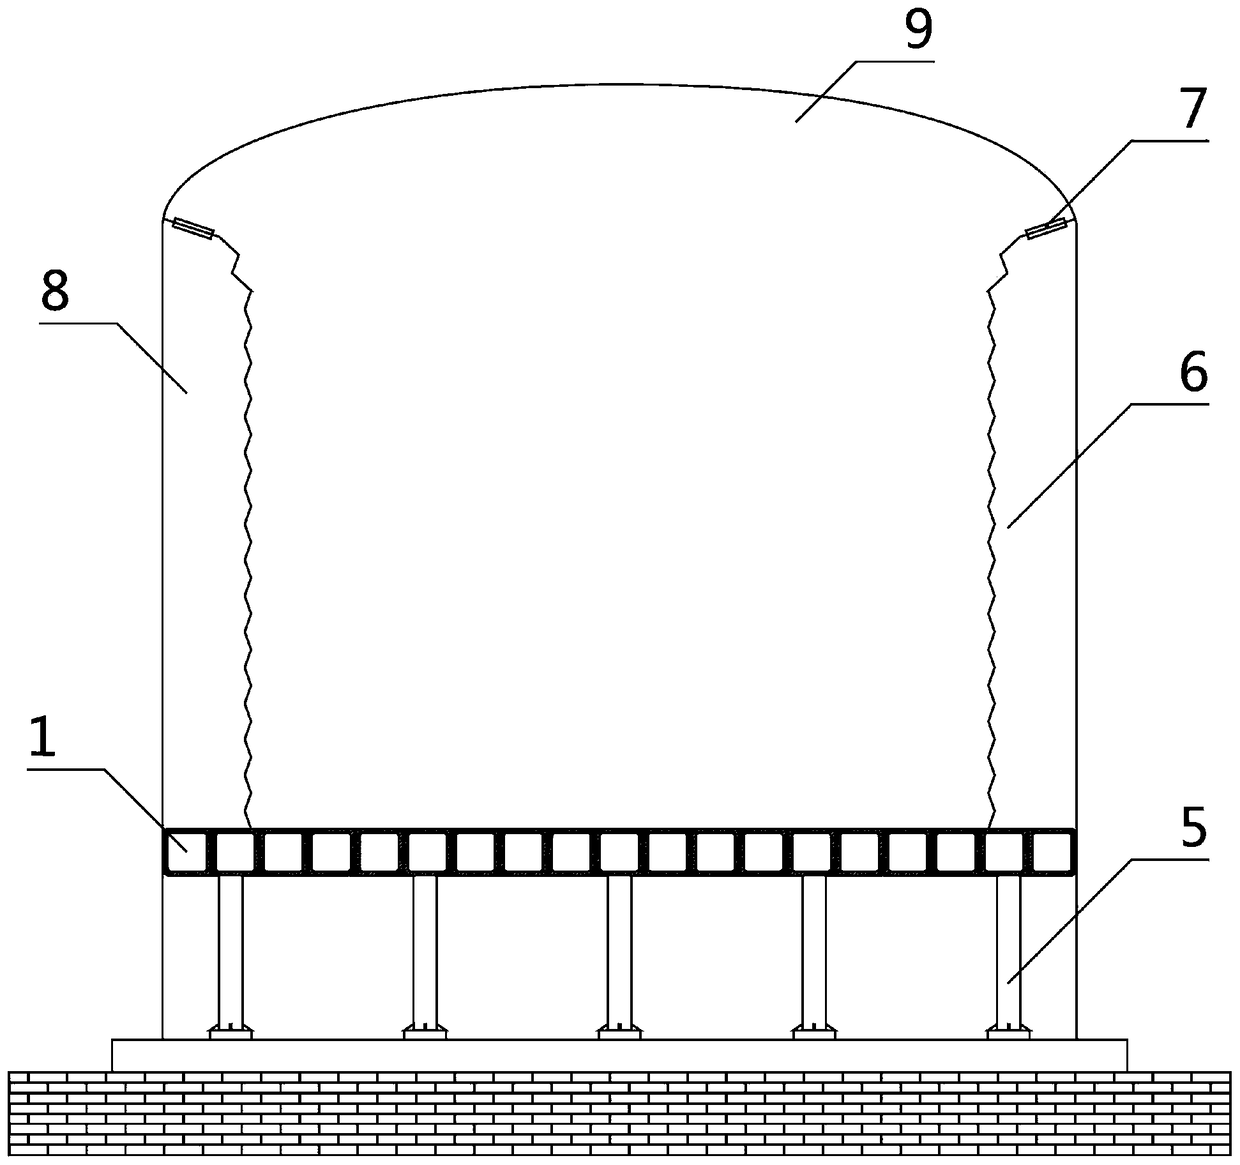 Single-disc type floating disc in storage tank